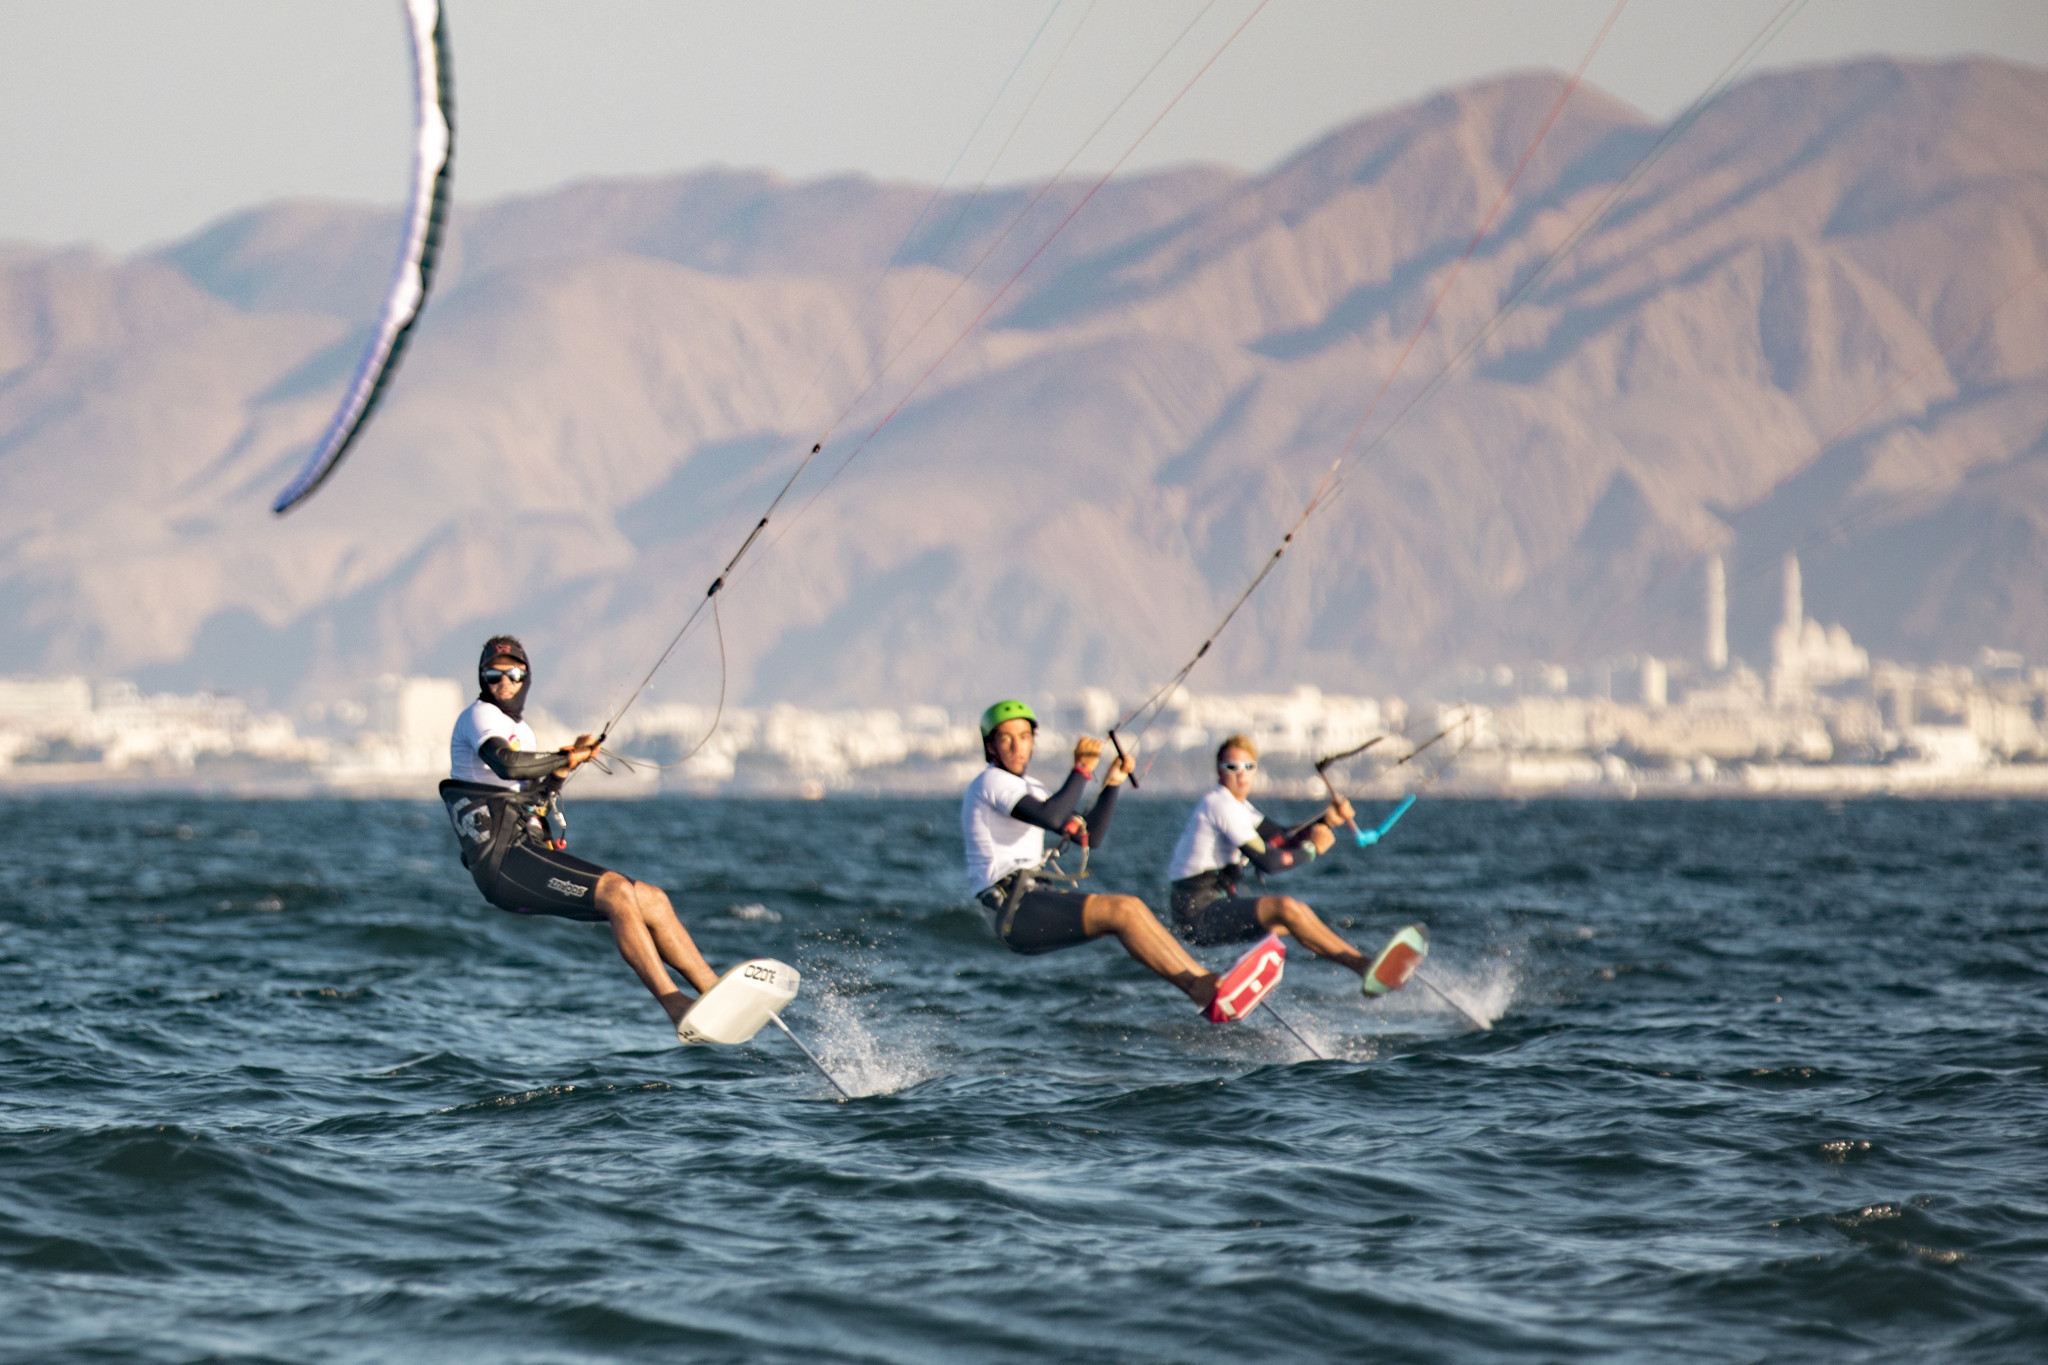 Nico Parlier is among the leaders at the kiteboarding event ©IKA Formula Kite World Championships